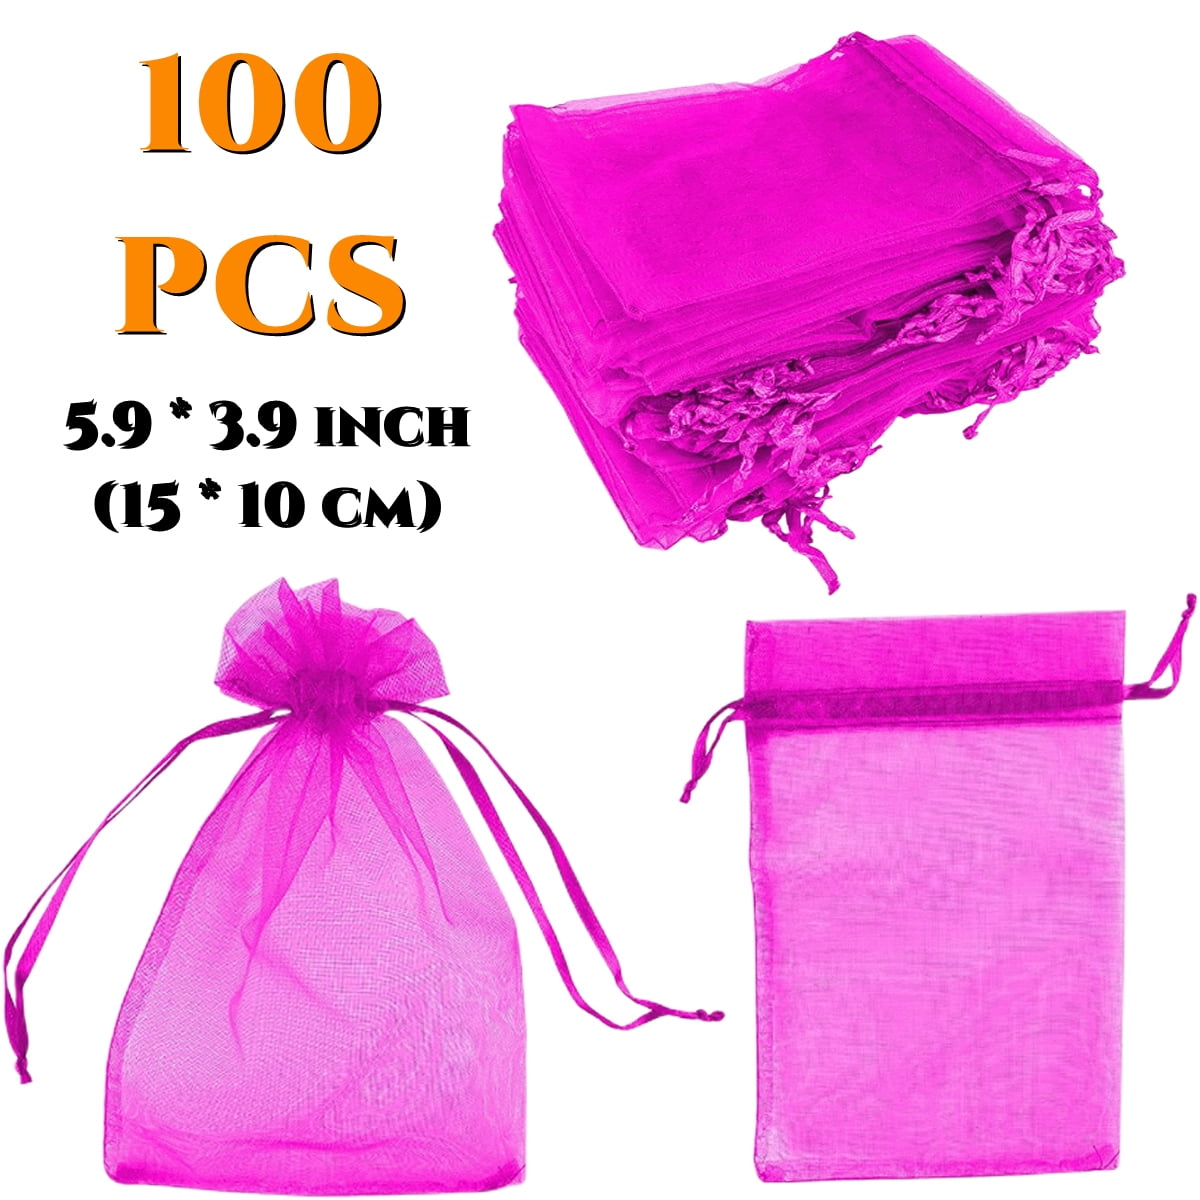 48 Organza DrawstRing Pouches Gift Bags Assorted Colors 4x5" AD 